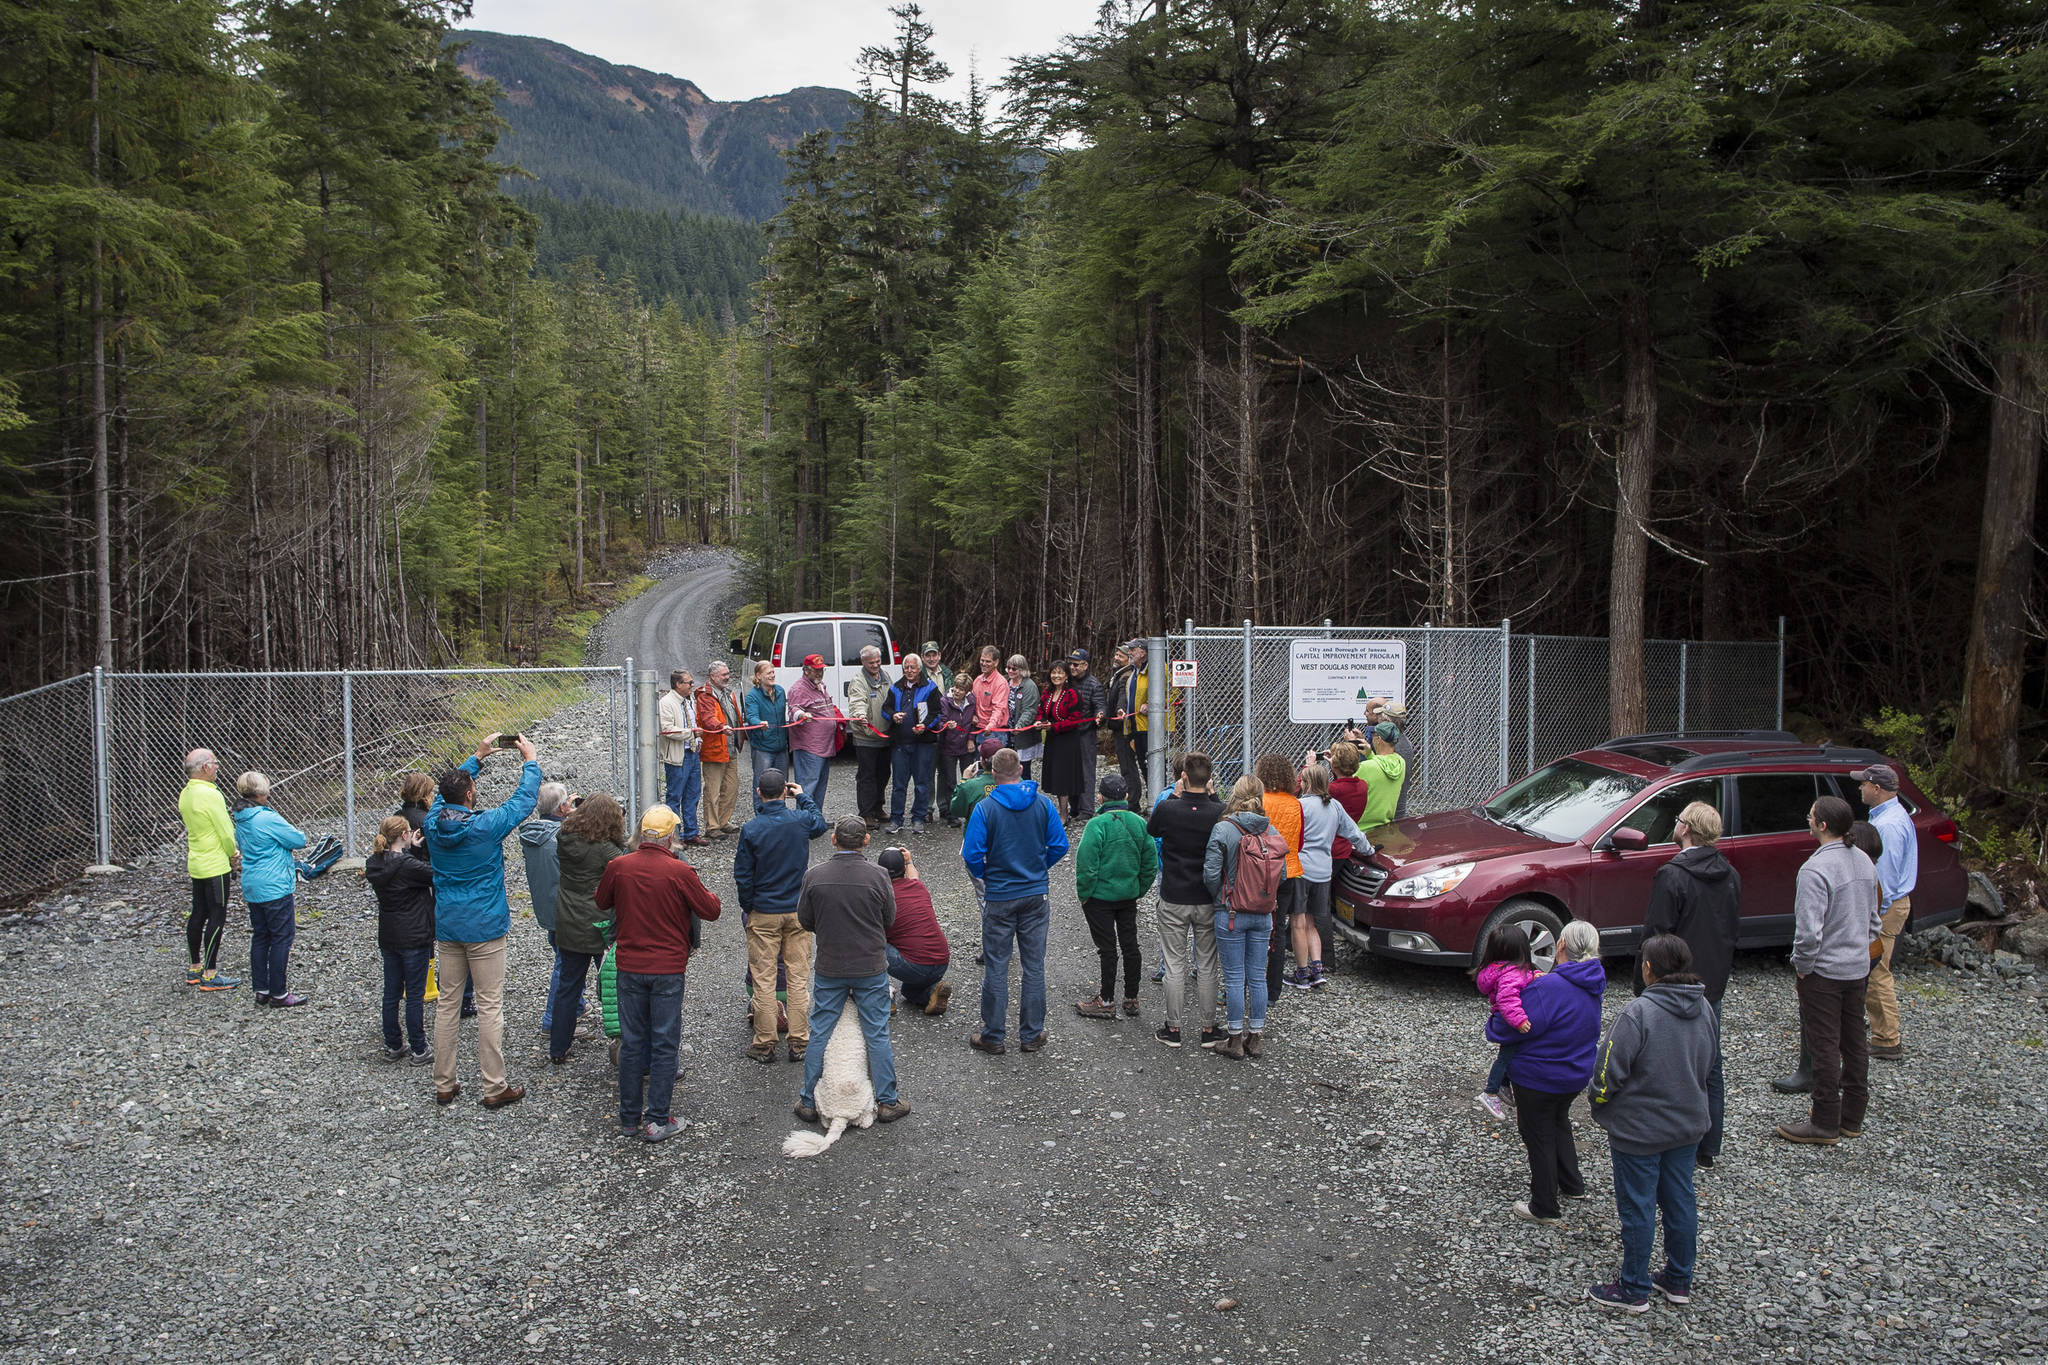 A small audience watches as city officials hold a ribbon cutting ceremony to officially open the West Douglas Pioneer Road on Friday, Sept. 28, 2018. (Michael Penn | Juneau Empire)